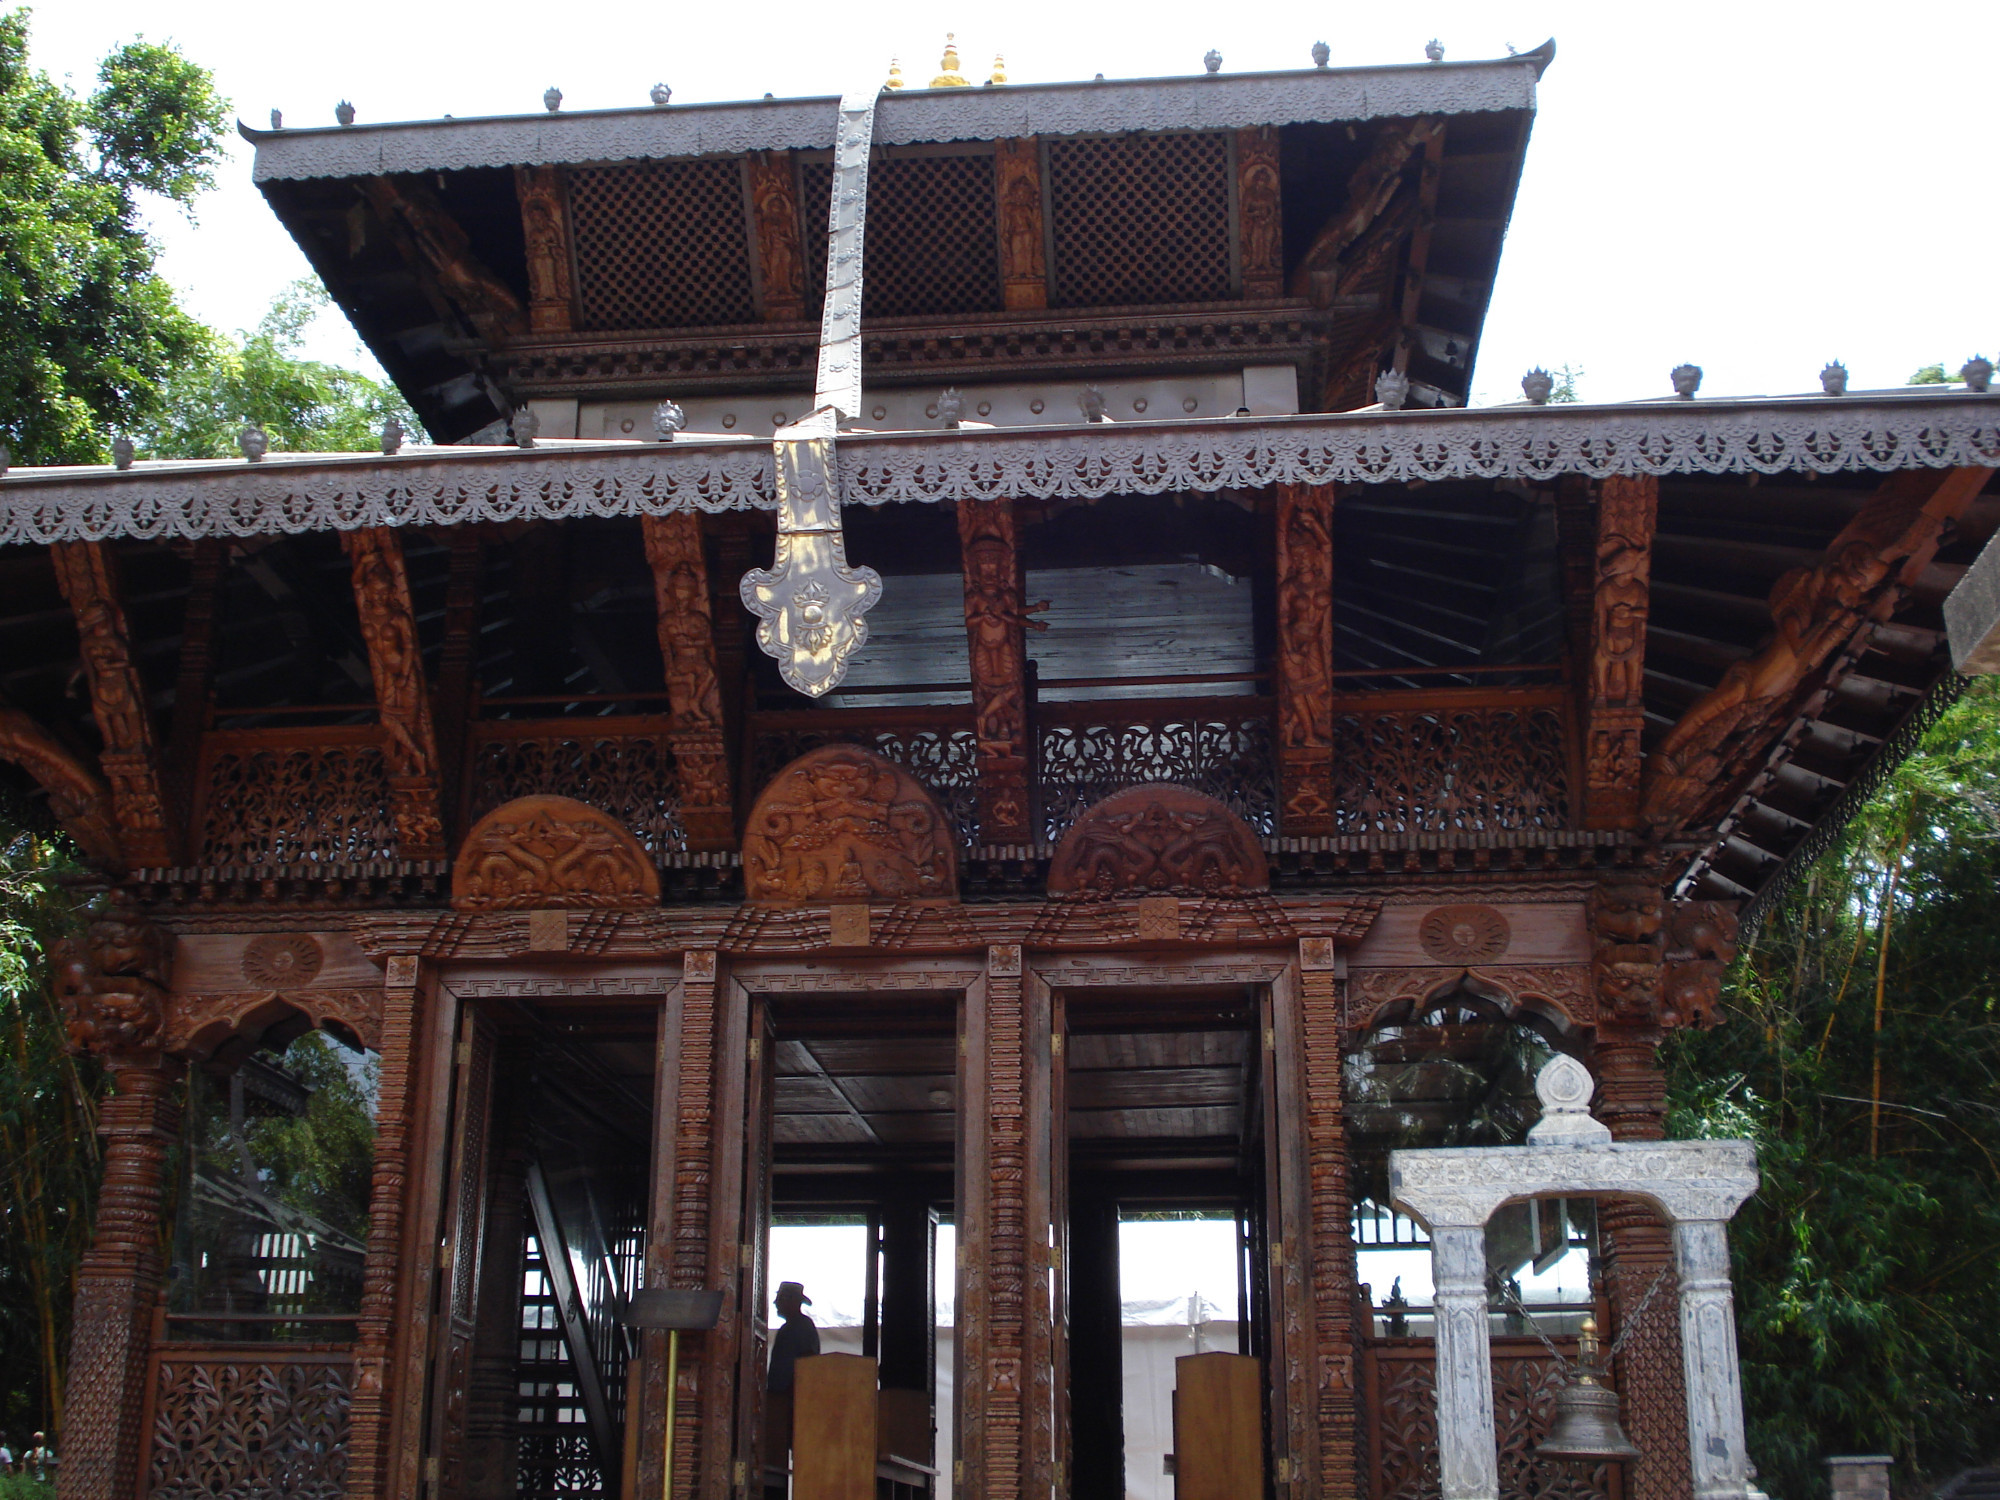 Nepalese Peace Pagoda<br/> <br/>
Heritage building